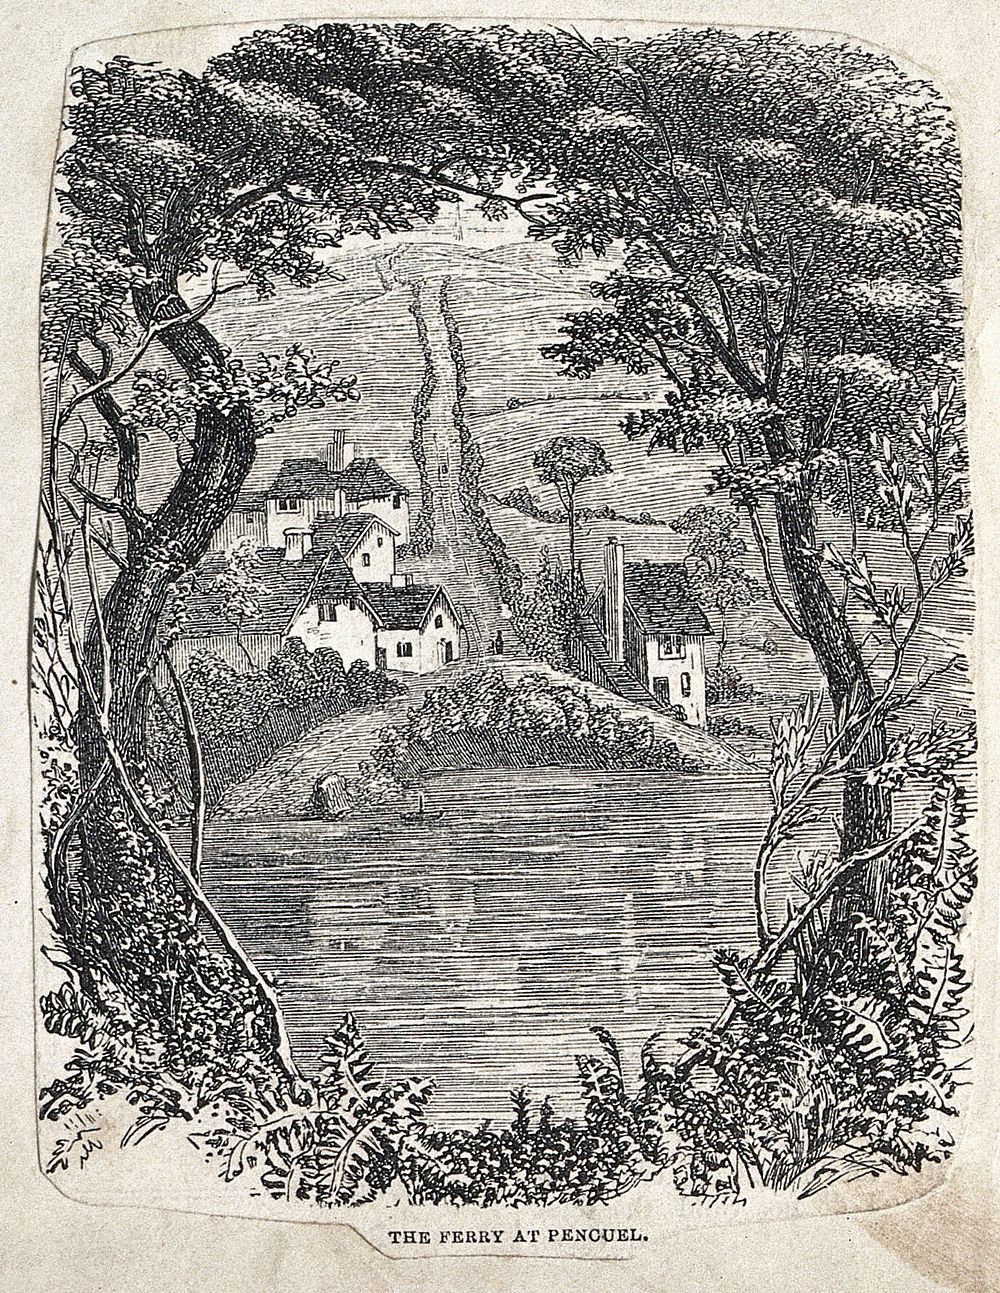 Landscape with a lake at Pencuel. Wood engraving.